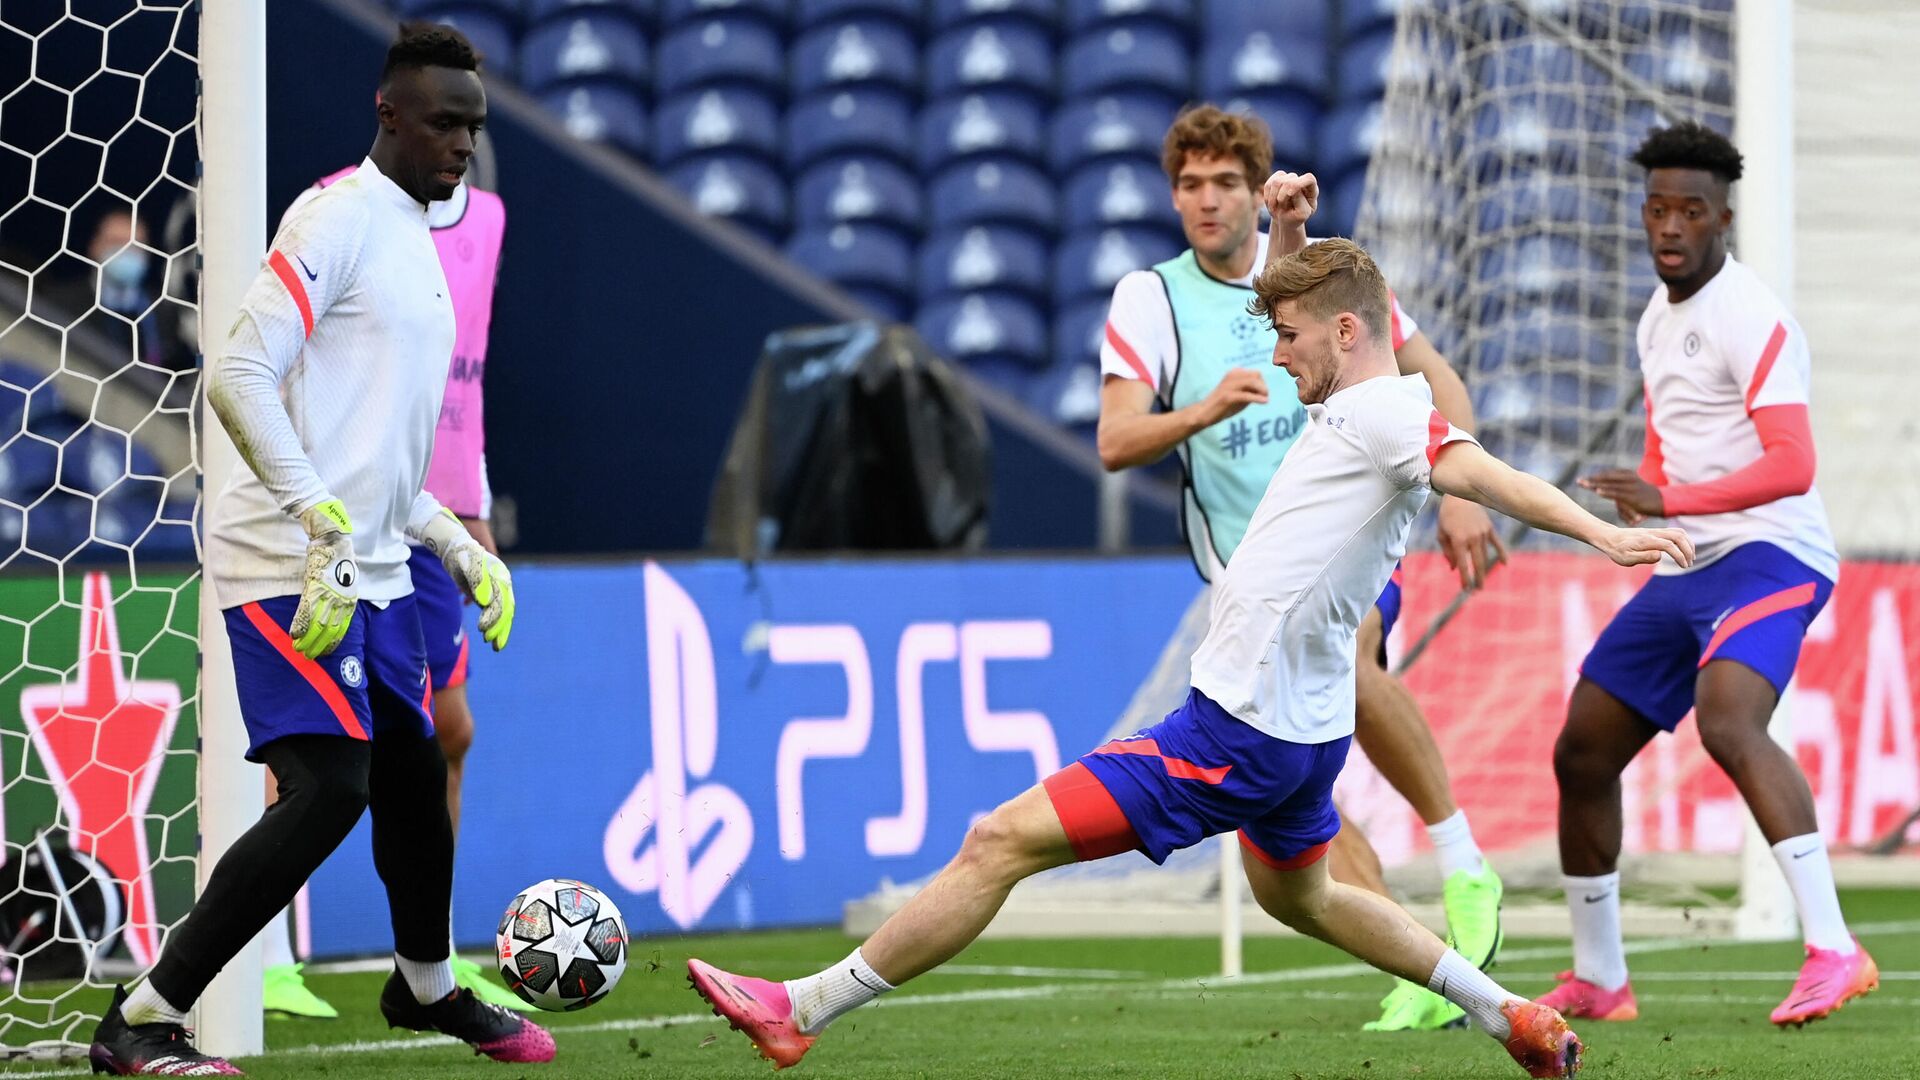 Chelsea's German forward Timo Werner kicks the ball during a training session at the Dragao stadium in Porto on May 28, 2021 on the eve of the UEFA Champions League final football match between Manchester City and Chelsea. (Photo by PIERRE-PHILIPPE MARCOU / AFP) - РИА Новости, 1920, 29.05.2021